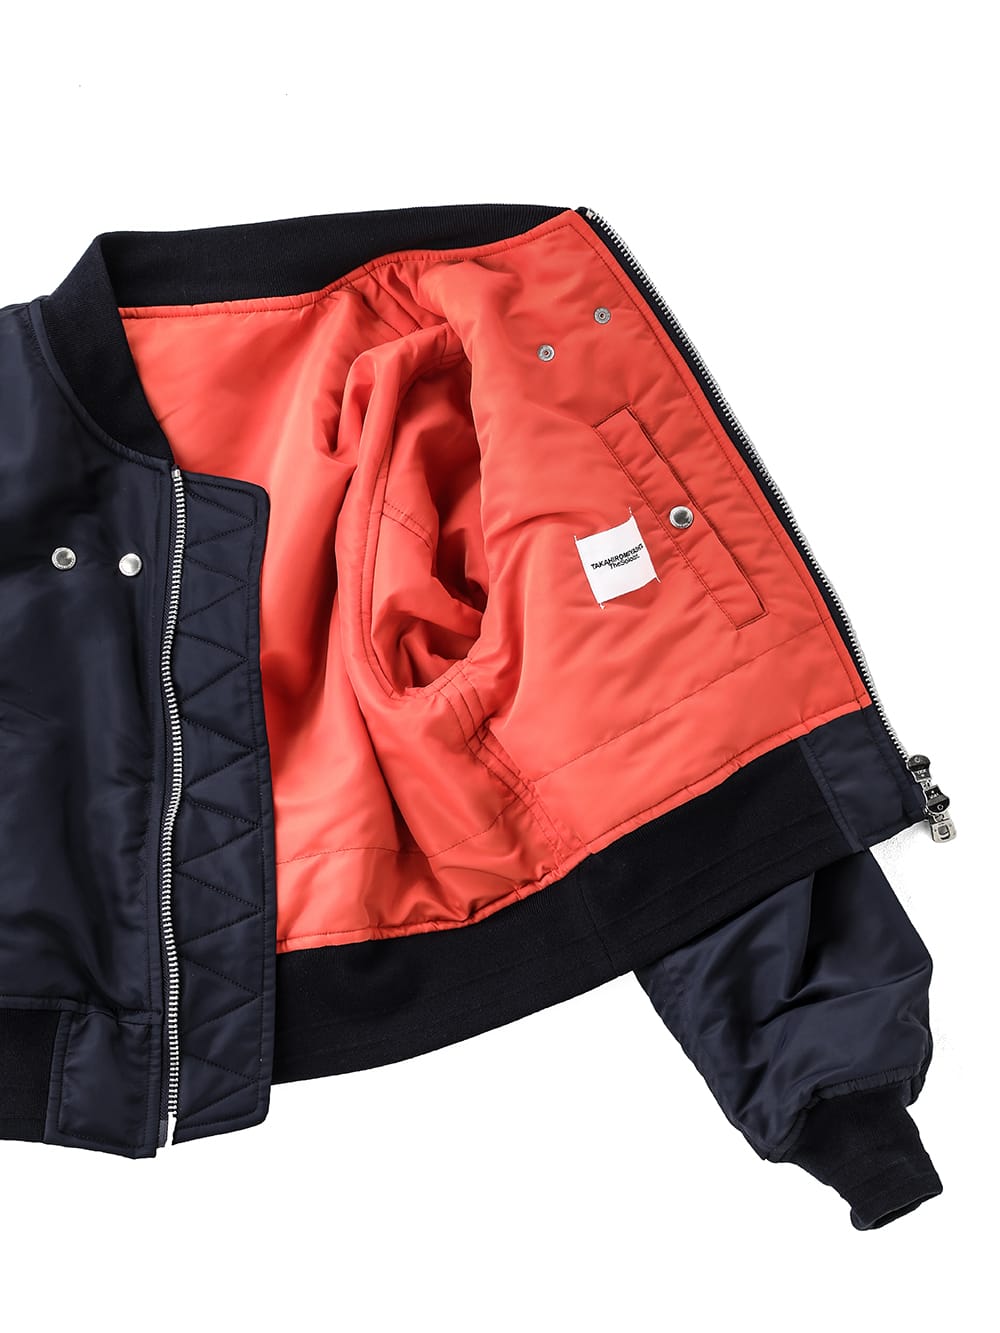 sj.0018bAW23-midnight two-way cropped bomber jacket. THE TWO OF US 